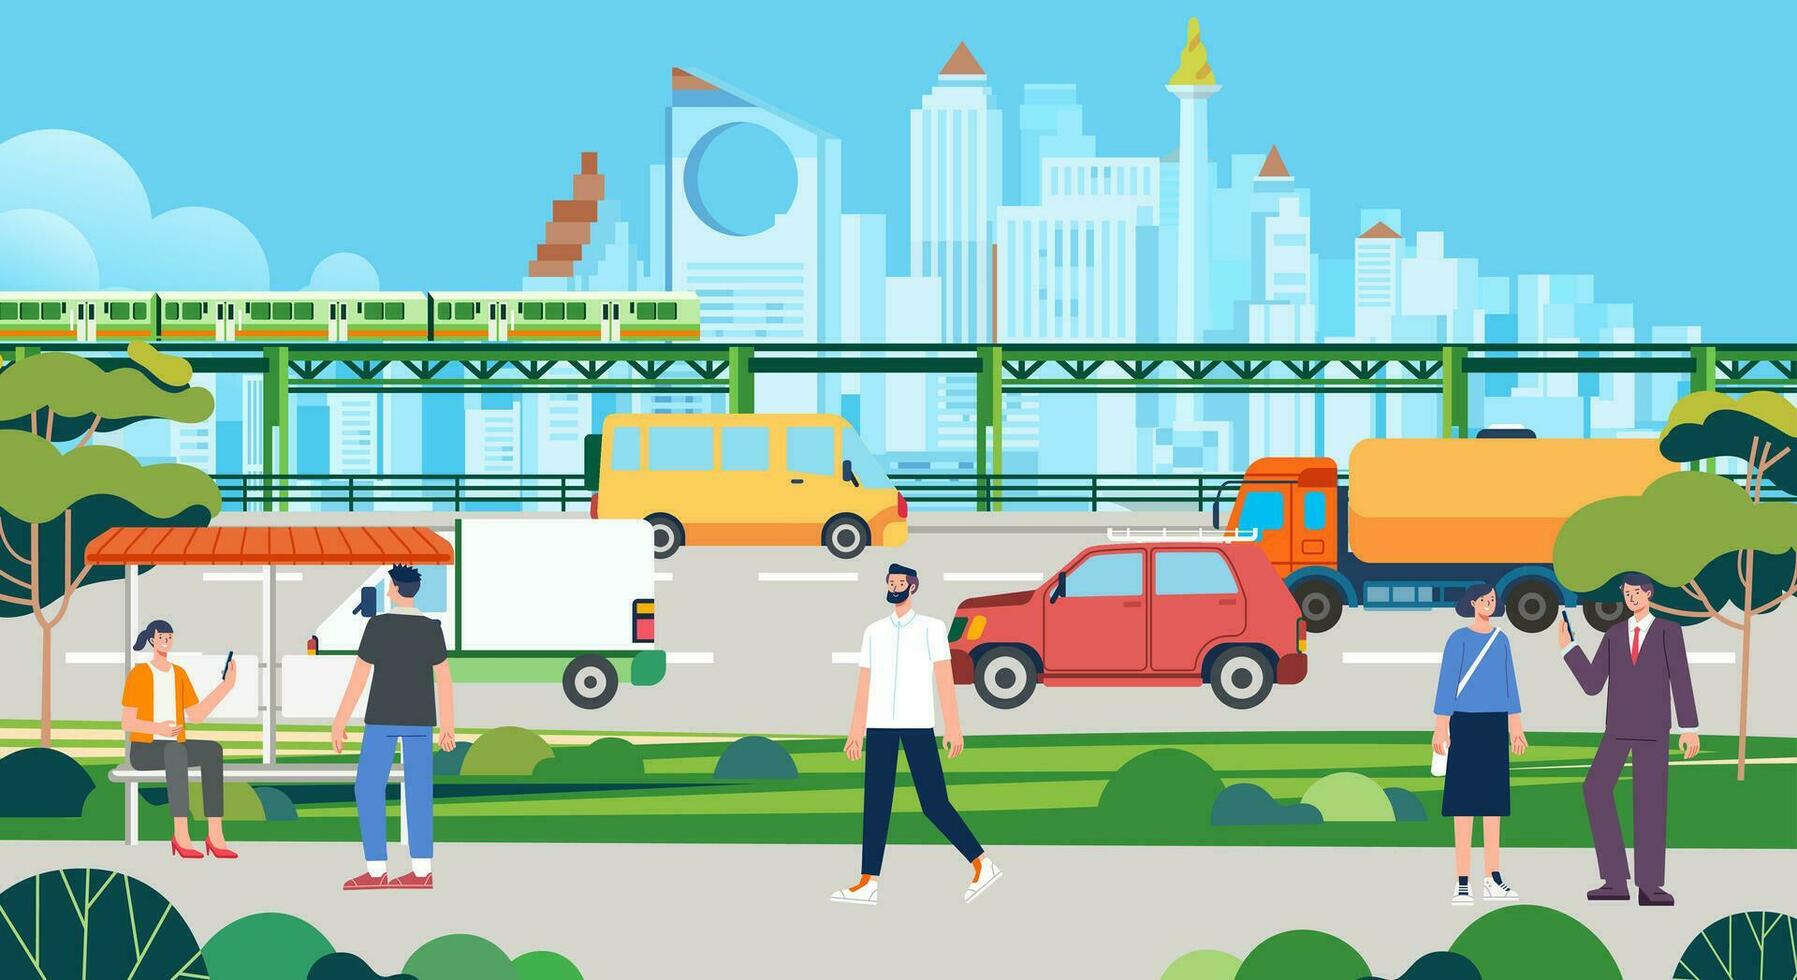 City life train monorail Cars on city road People walking with chat activity on street. Urban infrastructure modern futuristic city landscape and transport traffic vector